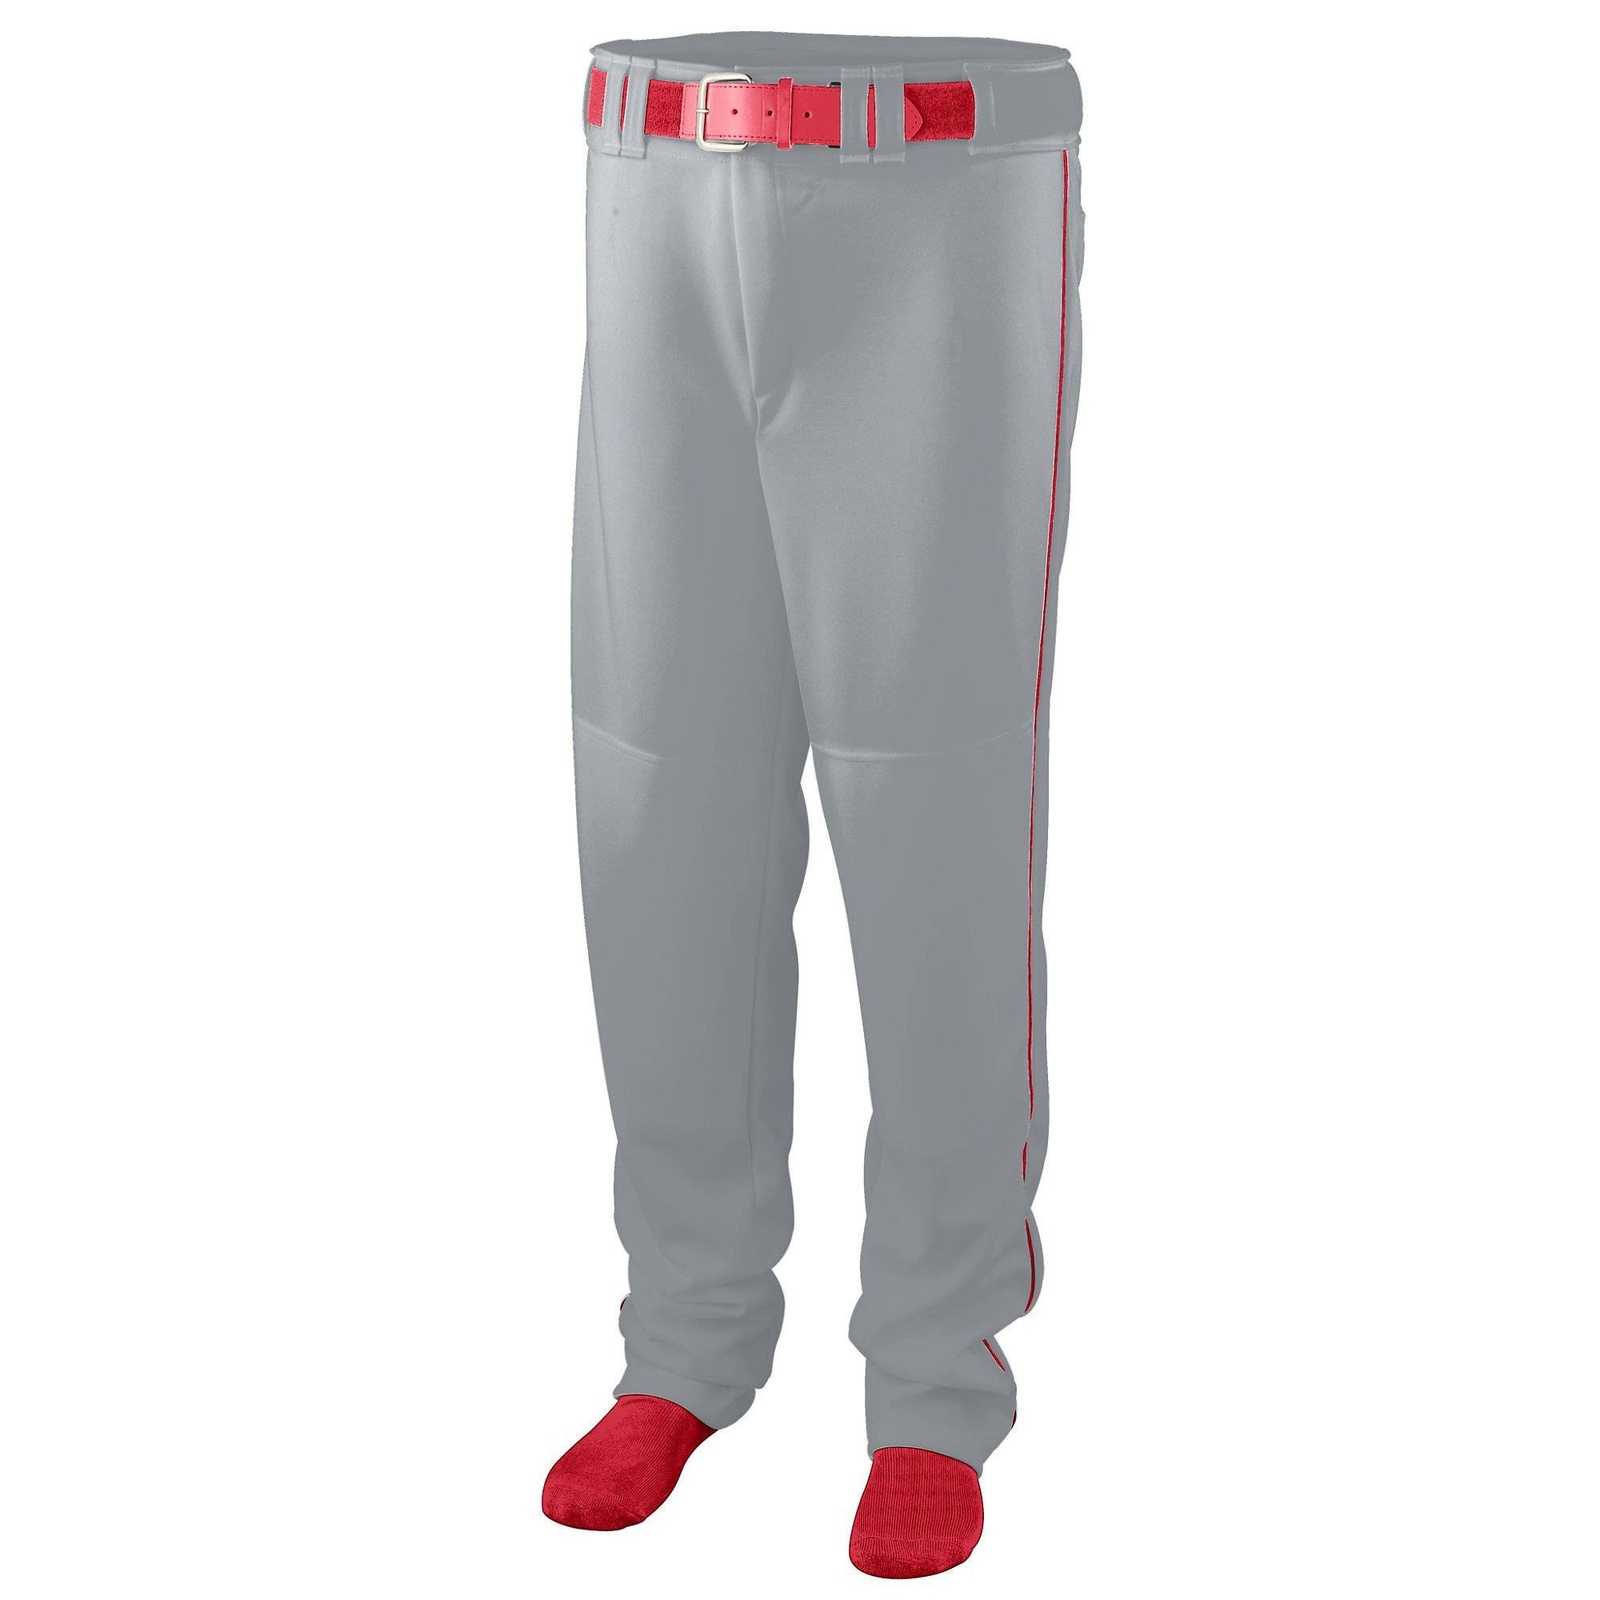 Augusta 1445 Series Baseball Softball Pant with Piping - Gray Red - HIT a Double